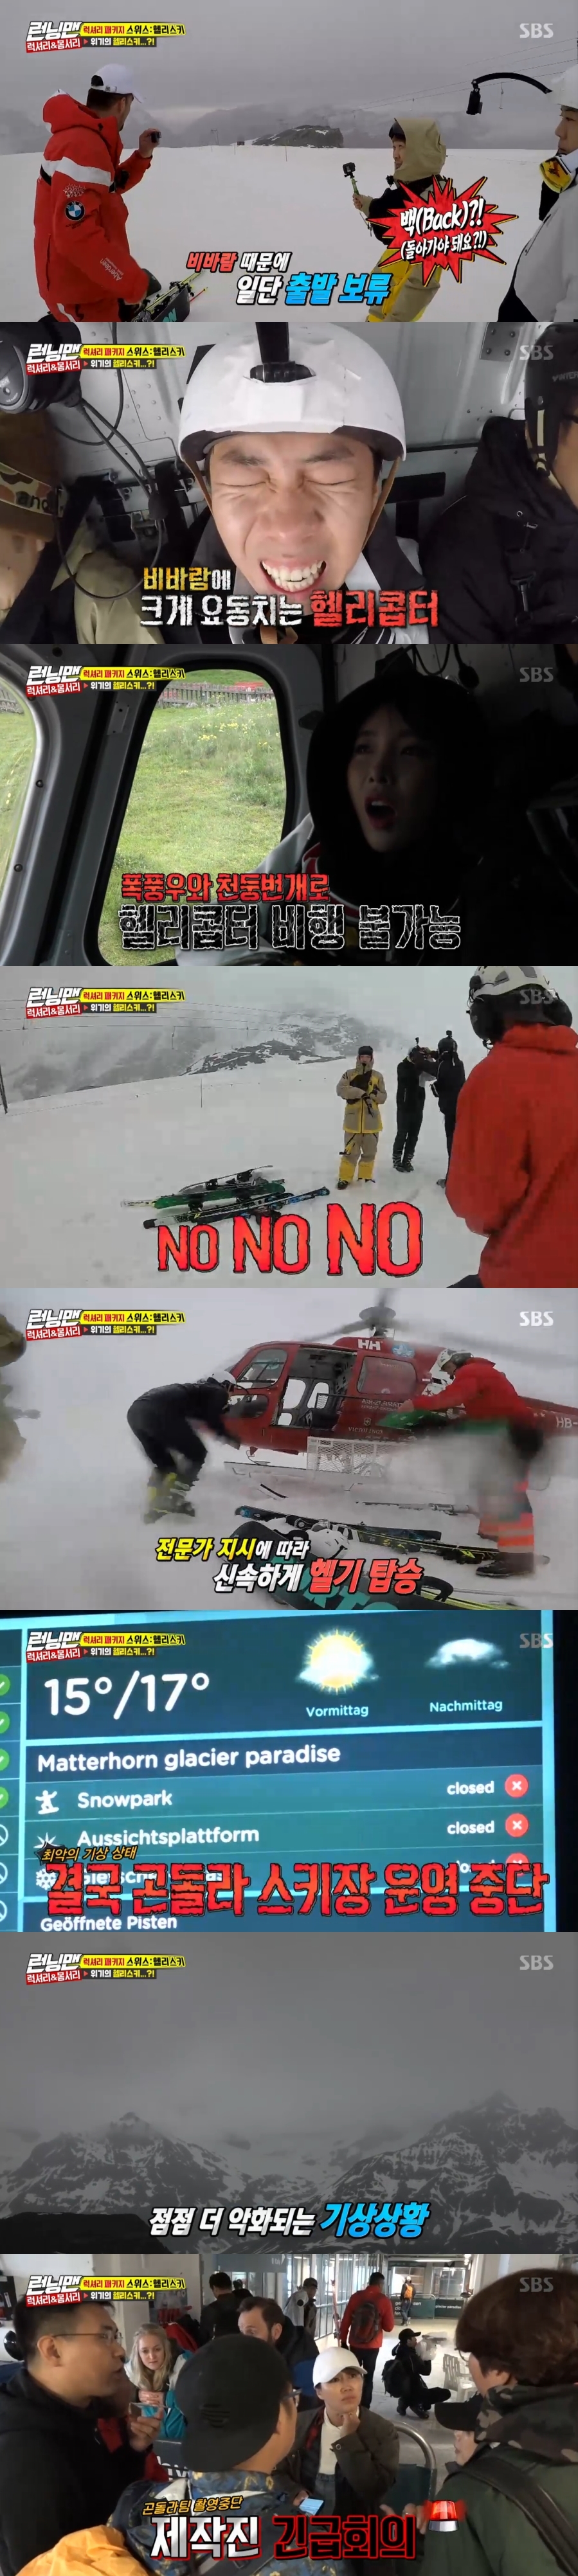 The anticipated luxury experience was finally destroyed due to the isolation of the Japan Alps in Everyday column.On July 1, SBS Running Man, Kim Jong-kook Hong Jin-young Yang Se-chan Haha Song Ji-hyo Kang Han-Na, who participated in the Switzerland luxury package, was released.Kim Jong-kook Song Ji-hyo Kang Han-Na challenged paragliding, which many people consider to be bucket lists at Switzerland Chermat.Before The Departure, I was nervous, but everyone raised their thumbs in a beautiful landscape.But the next course, the chance for PFC Levski Sofia, was blown away: Gondola PFC Levski Sofia was shut down in the worst weather conditions.The crew entered an emergency meeting.Fortunately Song Ji-hyo Kang Han-Na was before The Departure, but the problem was Yang Se-chan Haha Kim Jong-kook Hong Jin-young.Yang Se-chan Haha had already climbed to the top by helicopter, and Kim Jong-kook Hong Jin-young was on his way up.The rest of the members, in particular, were worried about Haha Yang Se-chan, who went by helicopter.Kim Jong-kook Hong Jin-young, who returned in the middle, was okay, but the helicopter team did not have an answer.At that time, Haha Yang Se-chans helicopter prepared to land quickly and landed safely.The Haha Yang Se-chan team put The Departure on hold because of the rain and wind; local staff have also become increasingly busy.Still, Haha Yang Se-chan once wore the gear with hope.But in the end, Haha Yang Se-chan team was also notified of the full suspension of HeliPFC Levski Sofia and screamed.Haha Yang Se-chan ran out, saying, It took me 28 hours to get here.Haha Yang Se-chan assembled as one place under the guidance of an expert at the risk of snow storms; for a moment the two men, in a state of distress crisis, waited for the rescue.It was a dangerous moment. As a result, a miraculous helicopter of salvation appeared and expressed its reverence.Haha Yang Se-chan swept away his surprised chest, saying, It was almost a big day, and quickly descended on a rescue helicopter.The Hong Jin-young Kim Jong-kook team, which was about to climb the mountain by helicopter along Haha Yang Se-chan, also dropped off as storms and thunderstorms made it impossible to fly helicopters.So Switzerland HeliPFC Levski Sofia was finally lost, and all the team members were disappointed.With only a deep regret, HeliPFC Levski Sofia has ended.bak-beauty